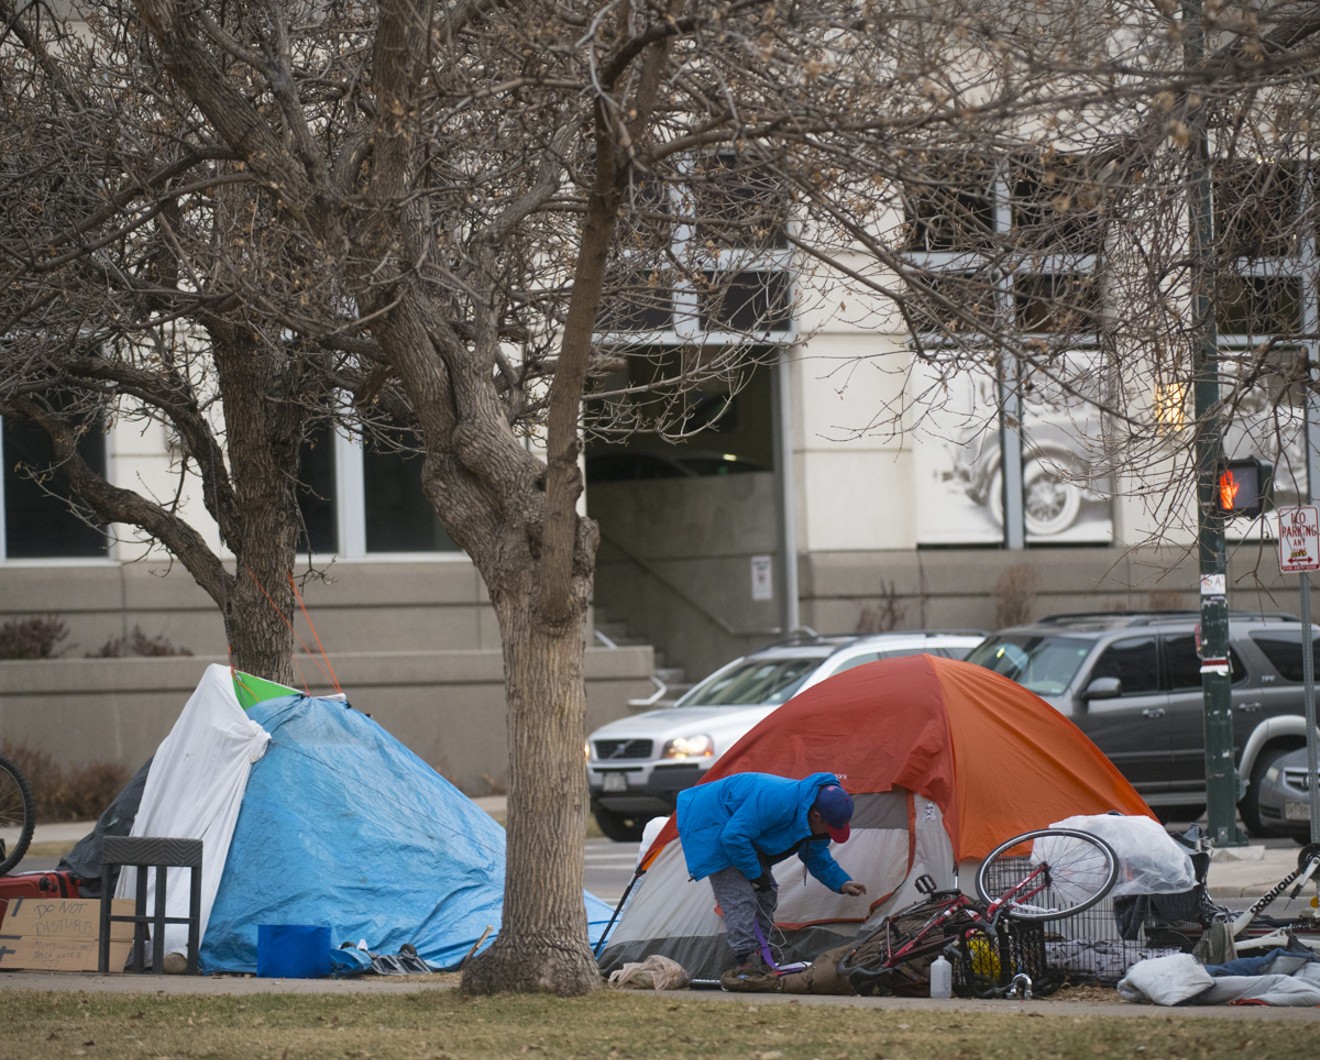 Denver will soon have temporary safe camping sites in various locations across the city.